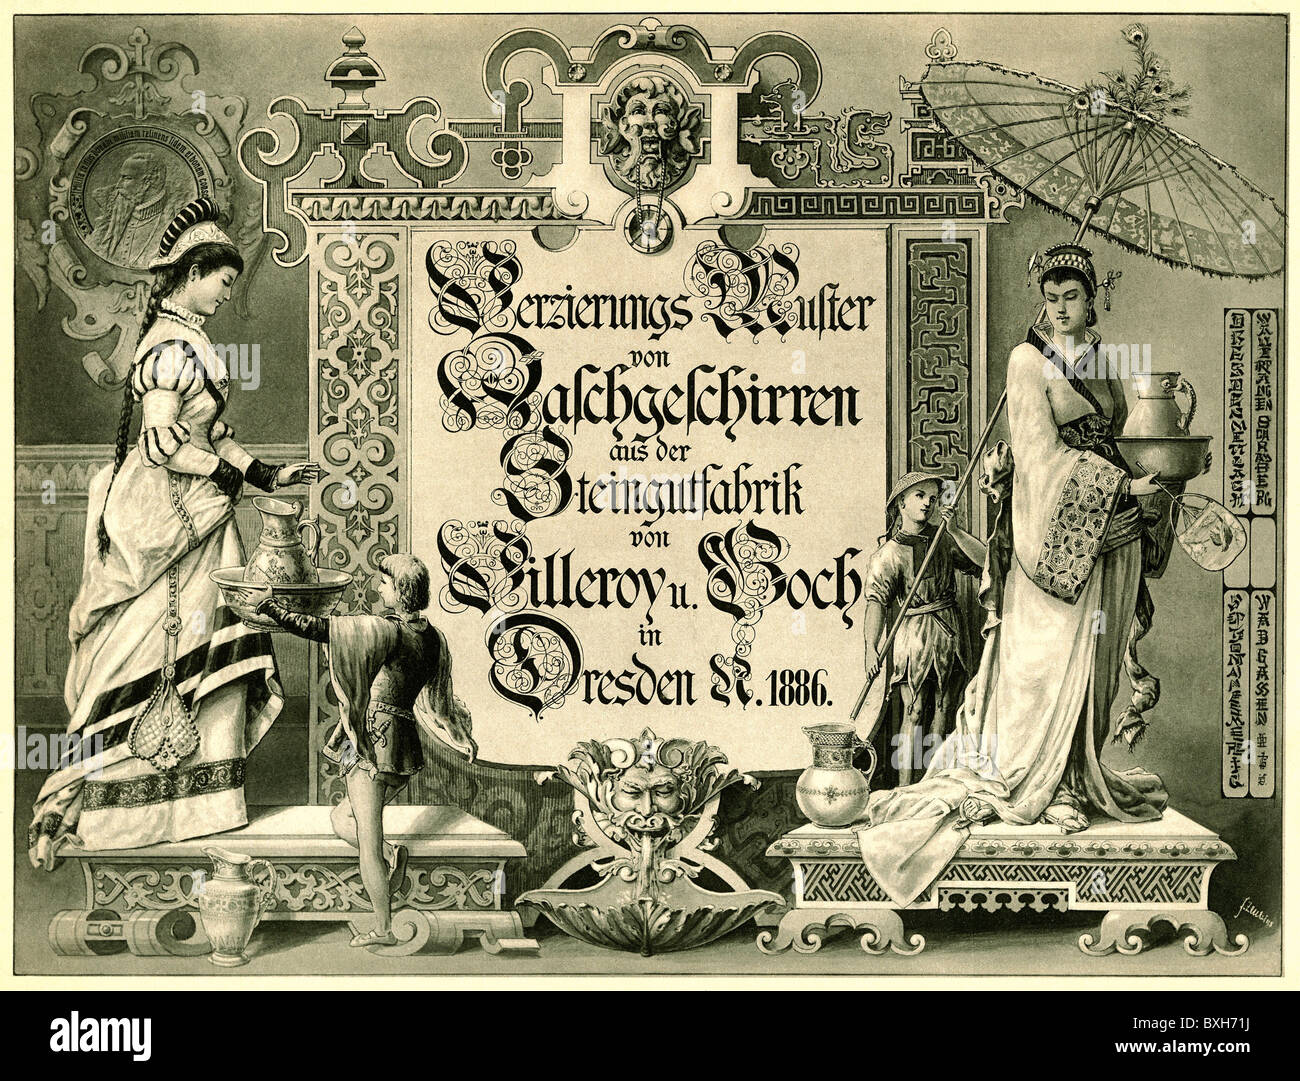 trade, catalogues & flysheets, Villeroy & Boch, cover, Dresden, Saxony, 1886, Additional-Rights-Clearences-Not Available Stock Photo